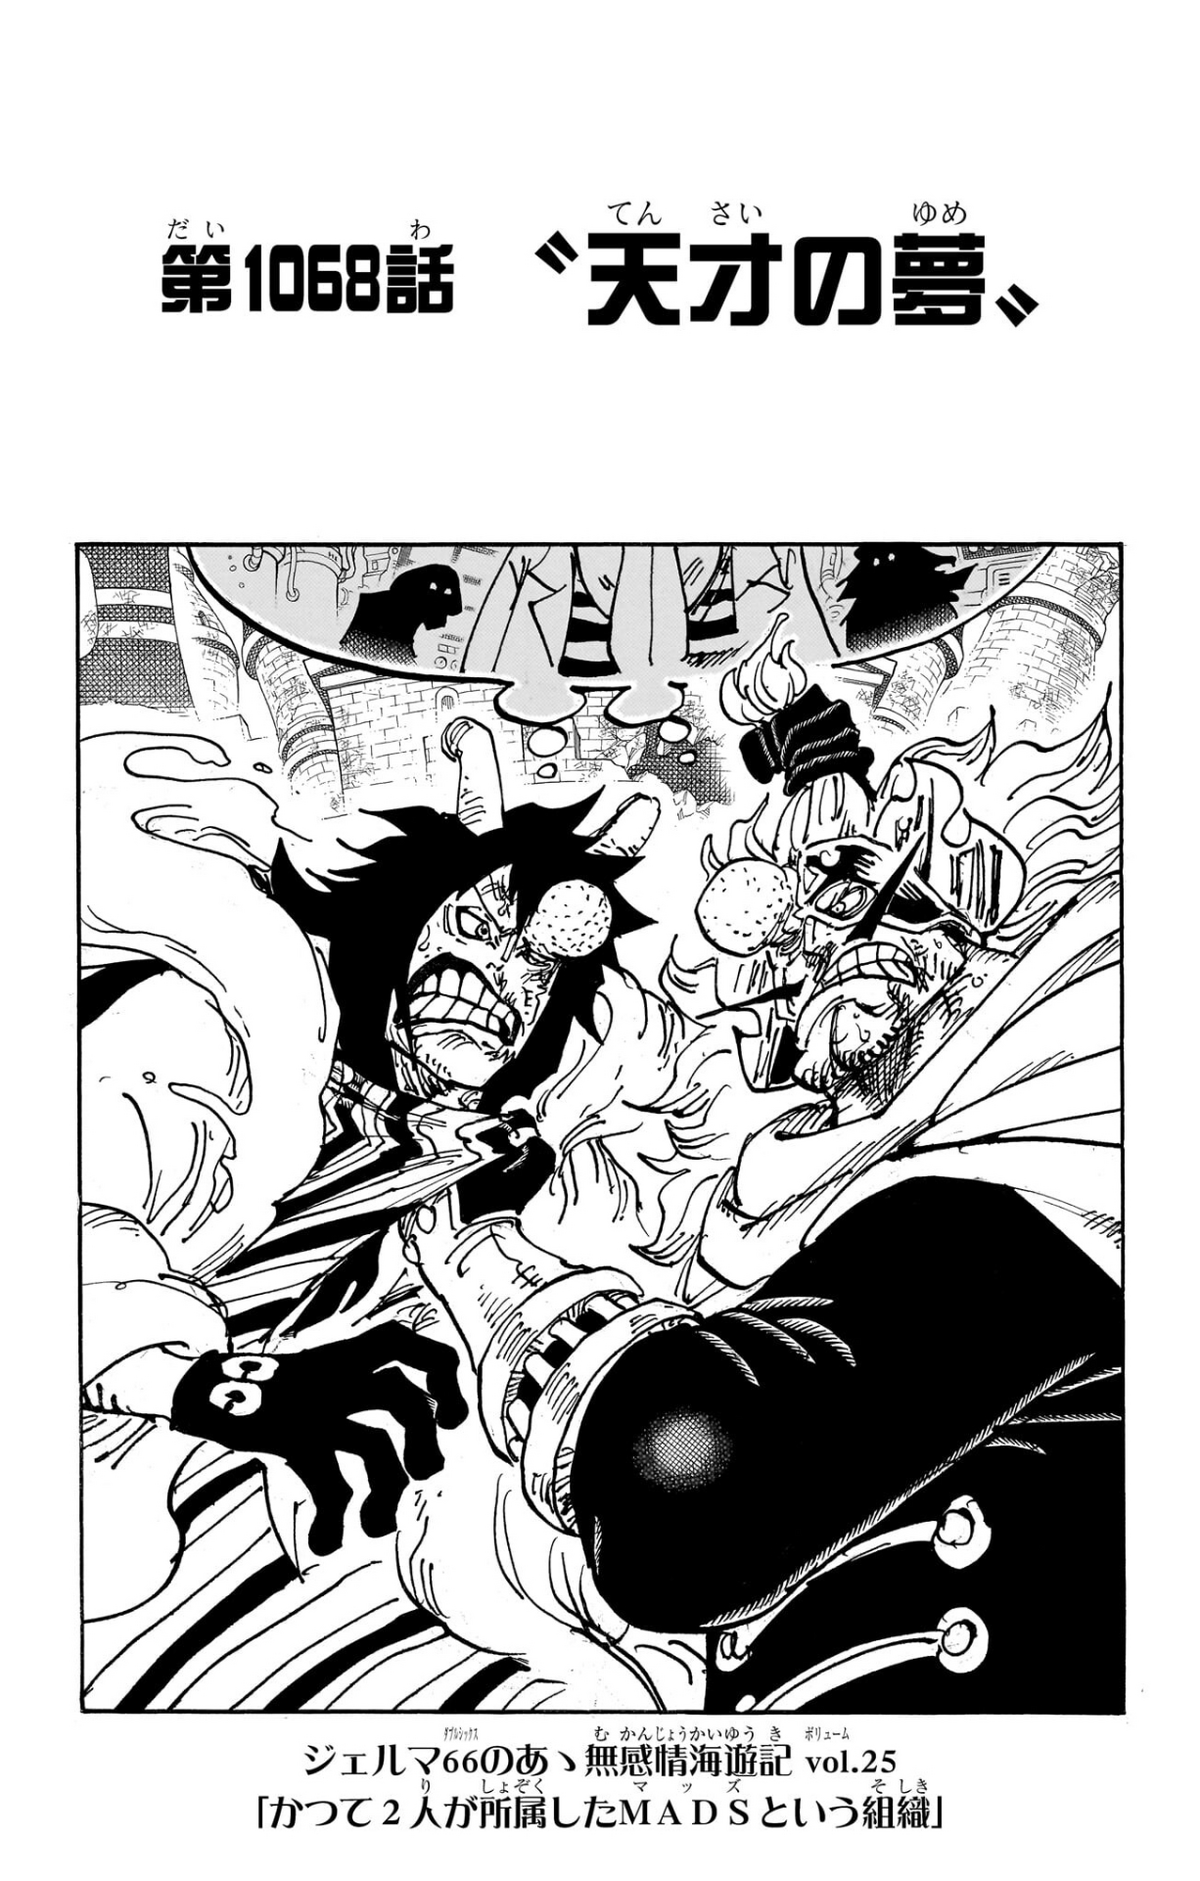 One Piece Chapter 1068 may reveal 25 years of One Piece World's secret  after a break